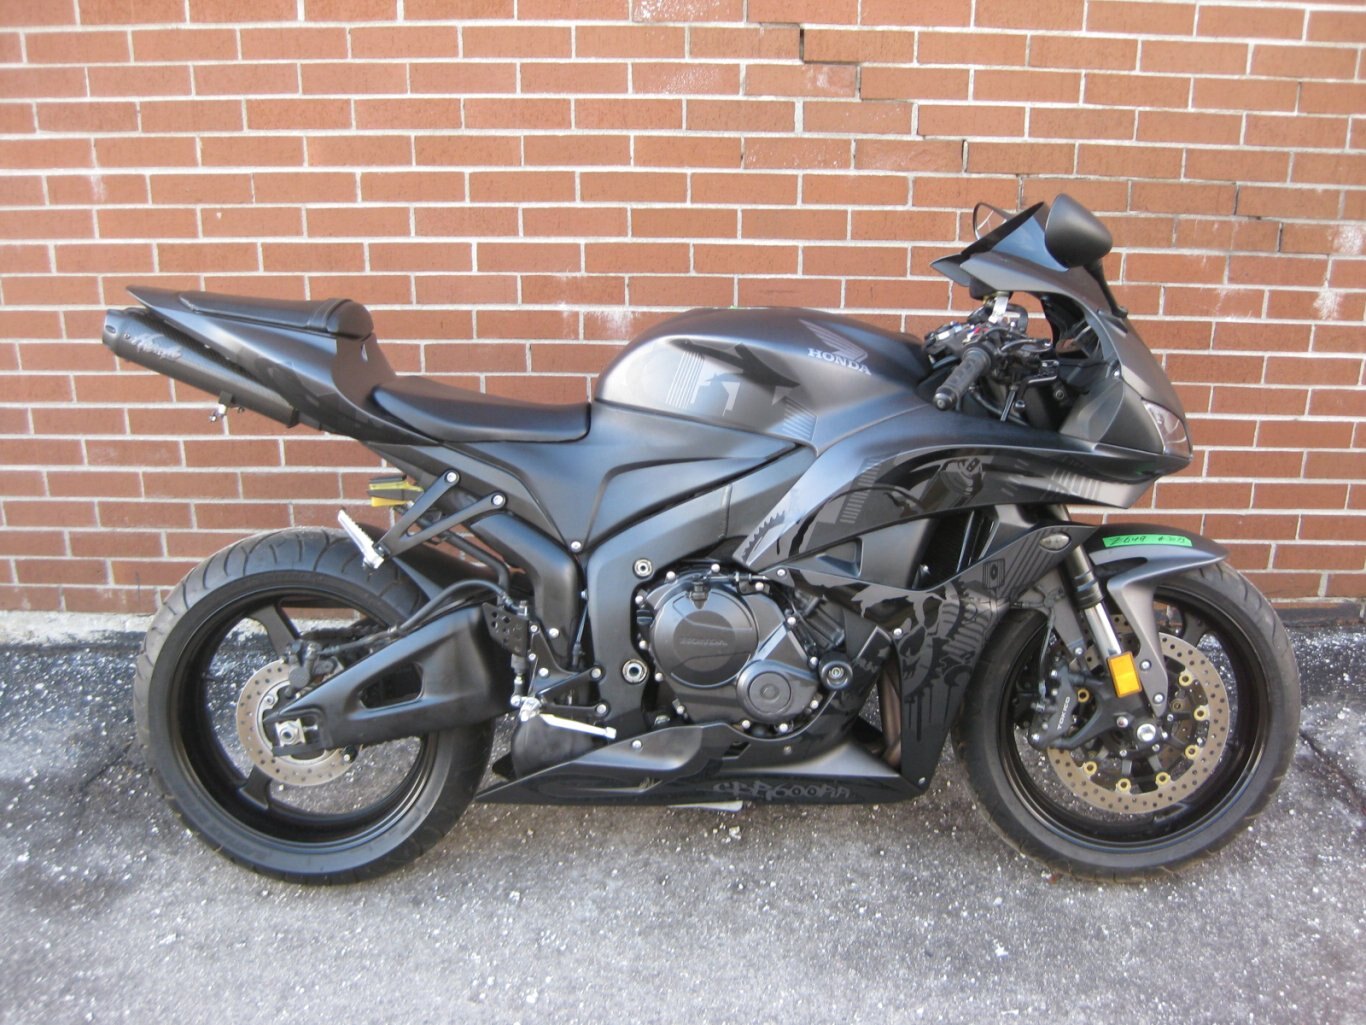 2008 CBR600RR Honda-Graffiti Edition-SOLD CONGRATULATION NATE-WELCOME TO THE WORLD OF TWO WHEELED EXCITEMENT ON THE RARE GRAFFITI EDITION CBR600RR, WITH THANKS FROM CHRIS AND THE ENTIRE TEAM AT CYCLE WORLD.